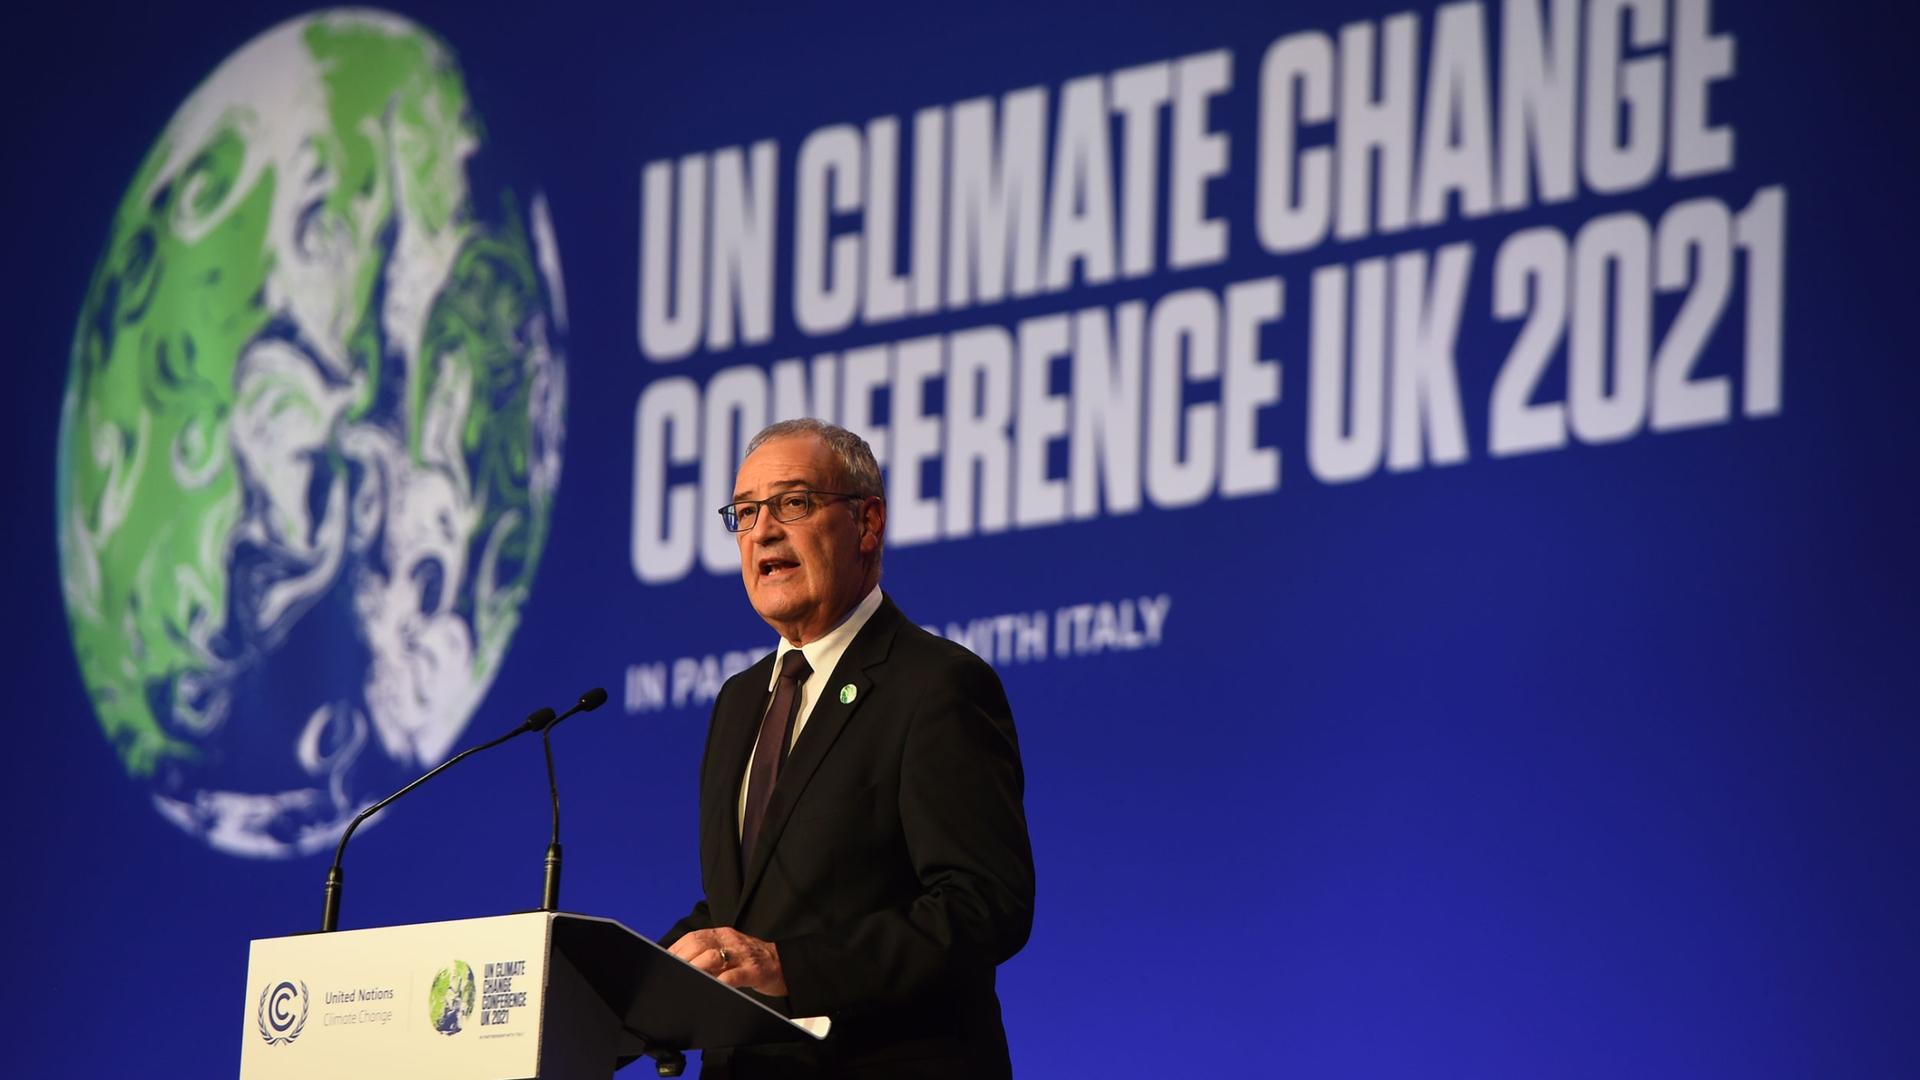 Switzerland's President Guy Parmelin speaks during the opening ceremony of the UN Climate Change Conference COP26 in Glasgow, Scotland, Monday Nov. 1, 2021. 